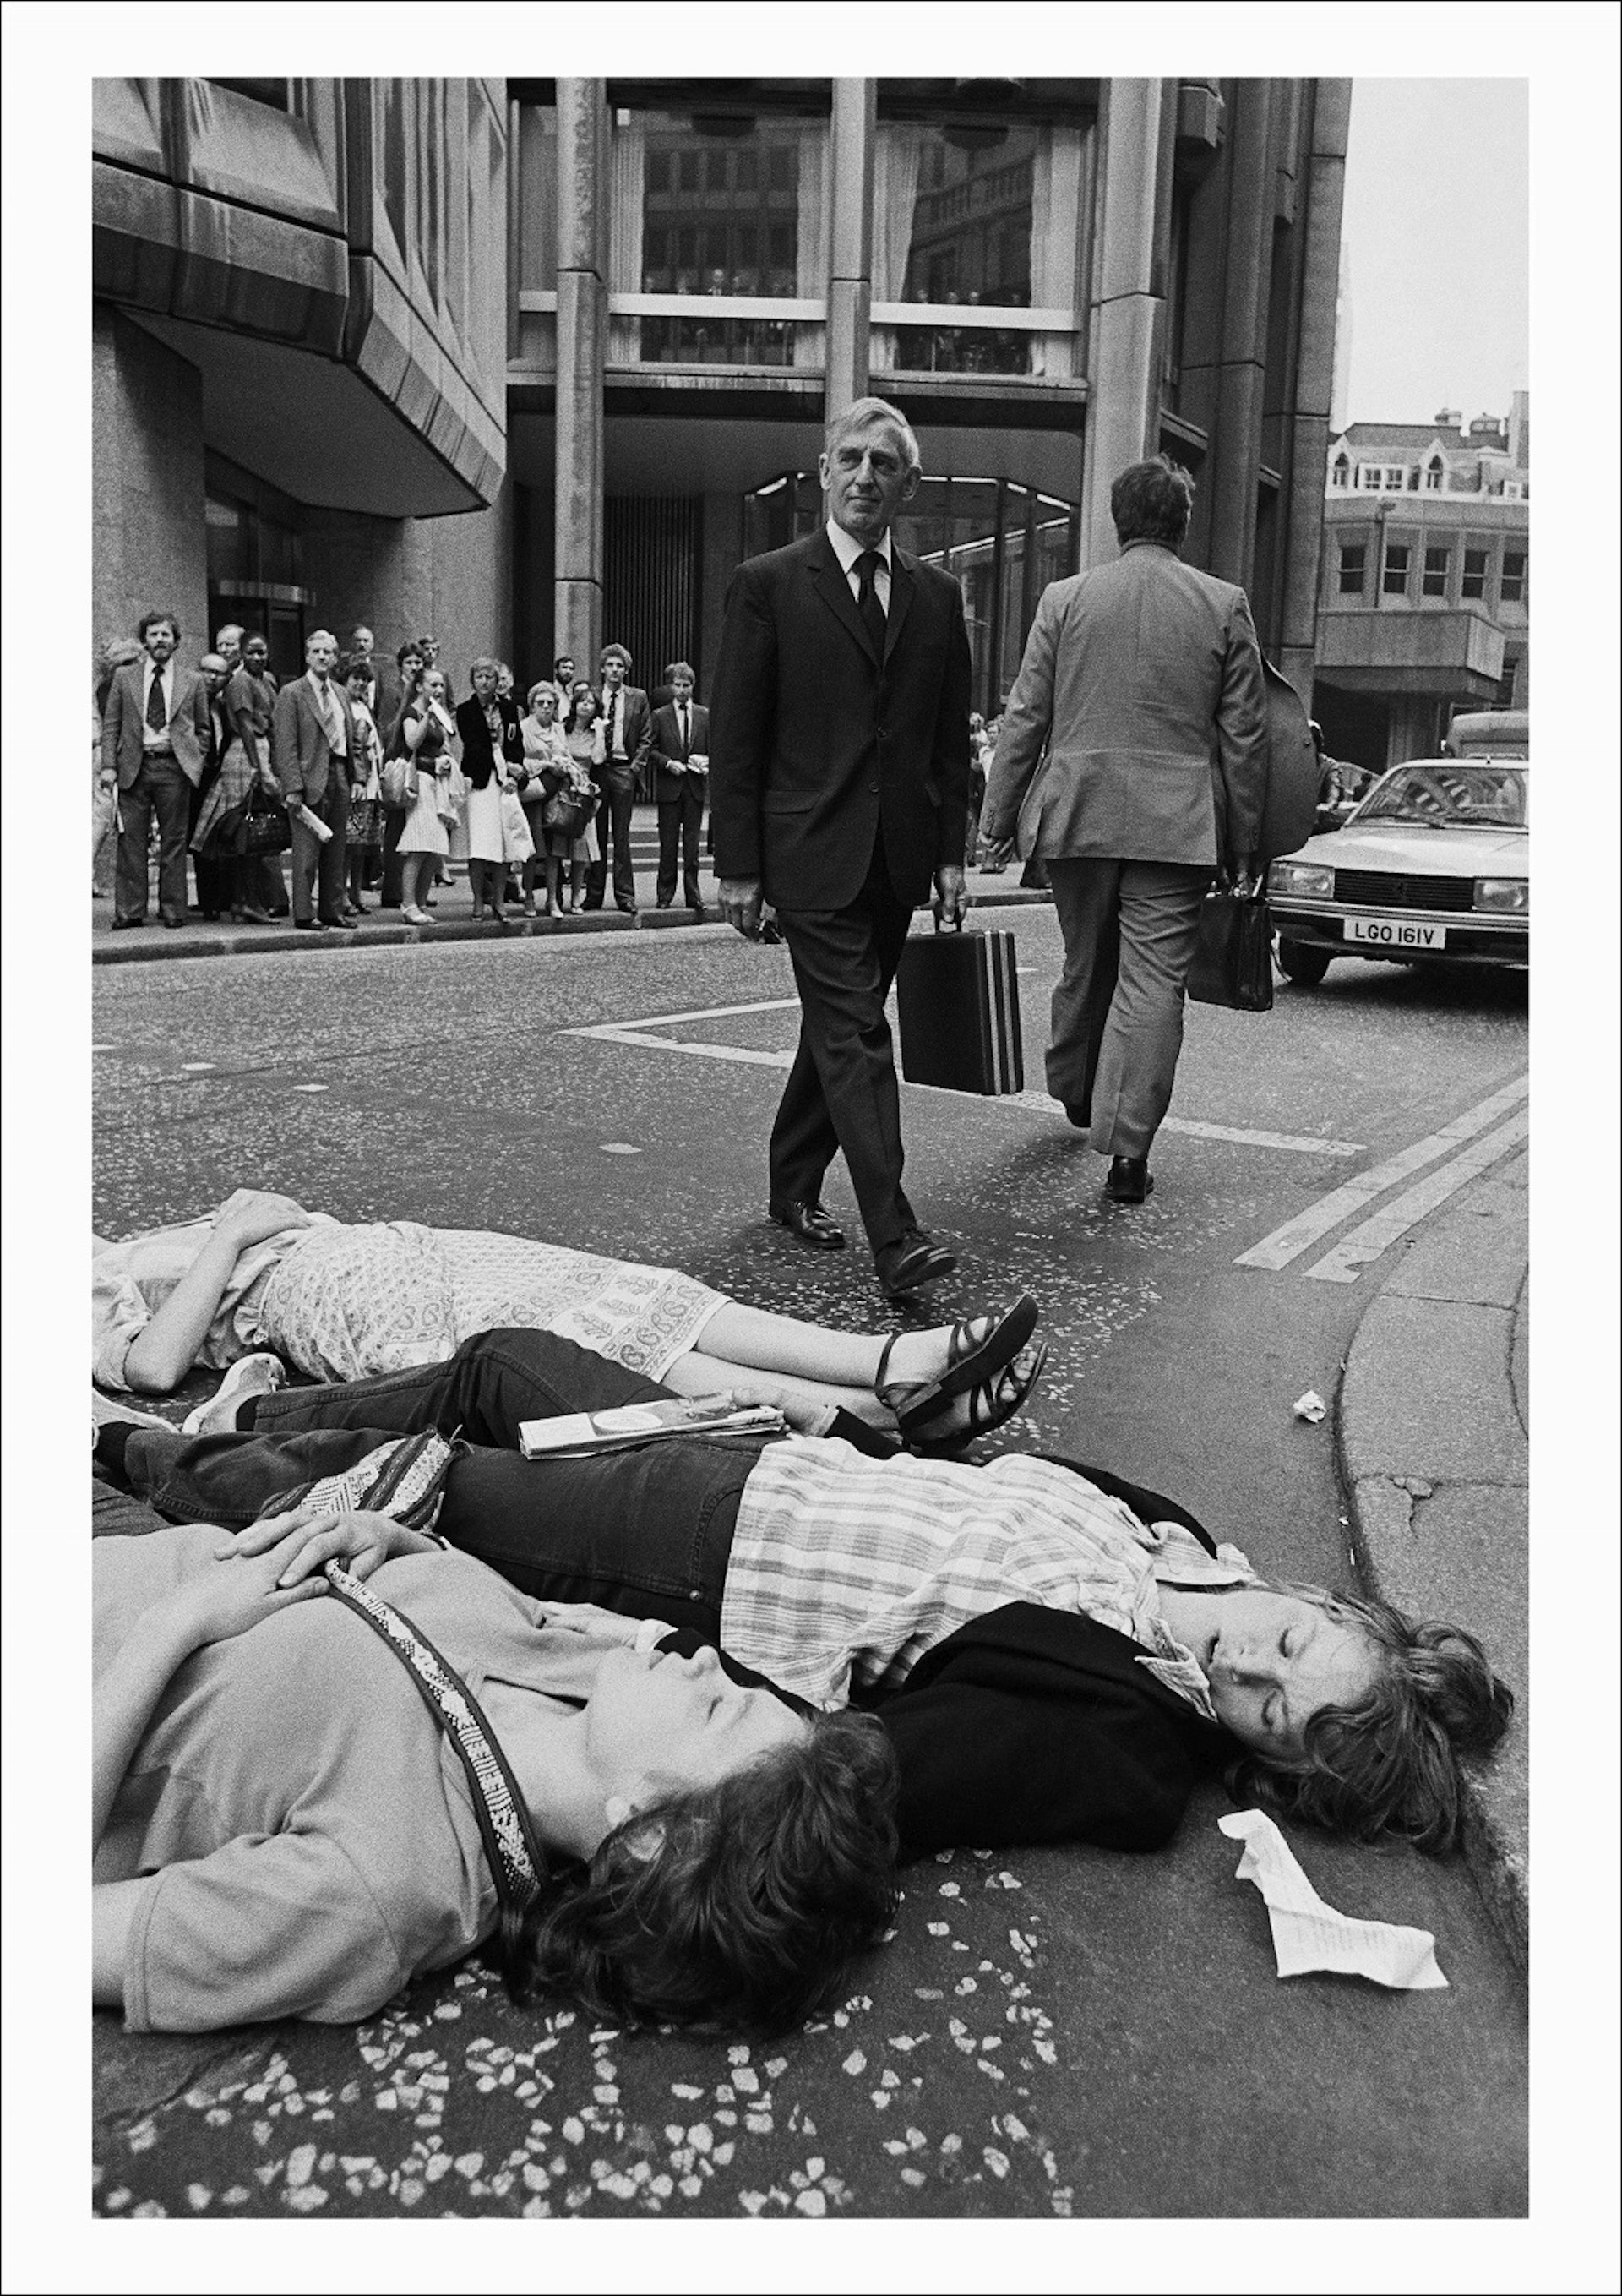 Greenham Common protesters stage a Die-in outside the Stock Exchange during the morning rush hour as U.S President Reagan arrives in Britain, City of London, 1982